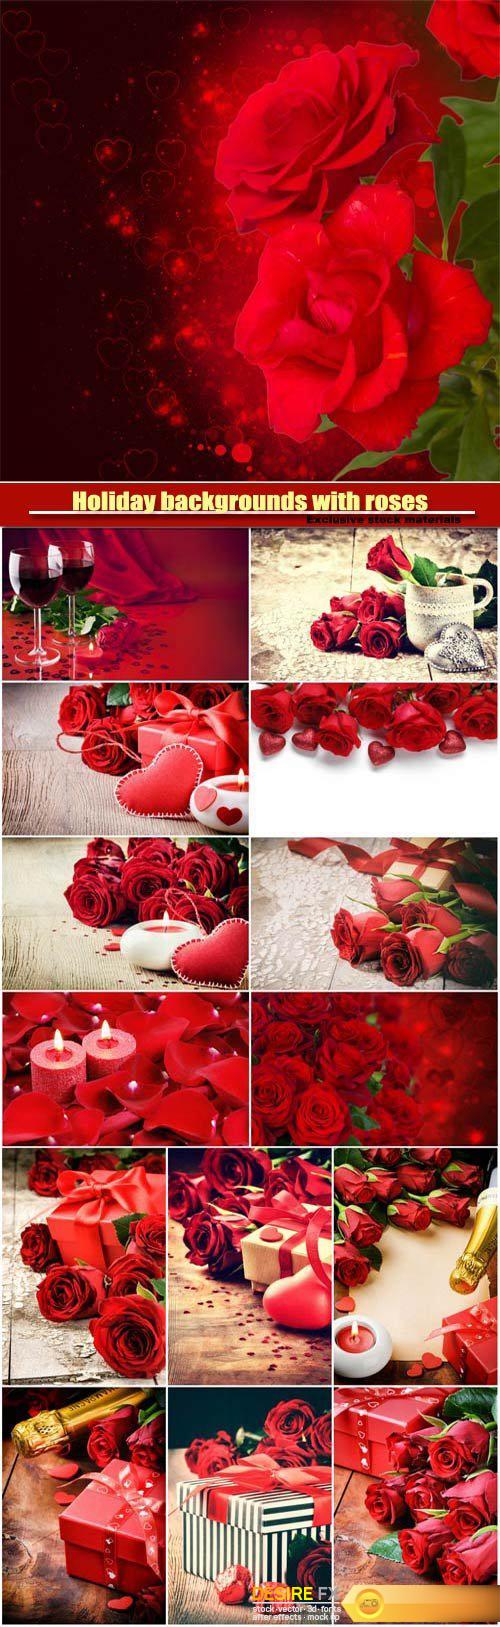 Holiday backgrounds with roses